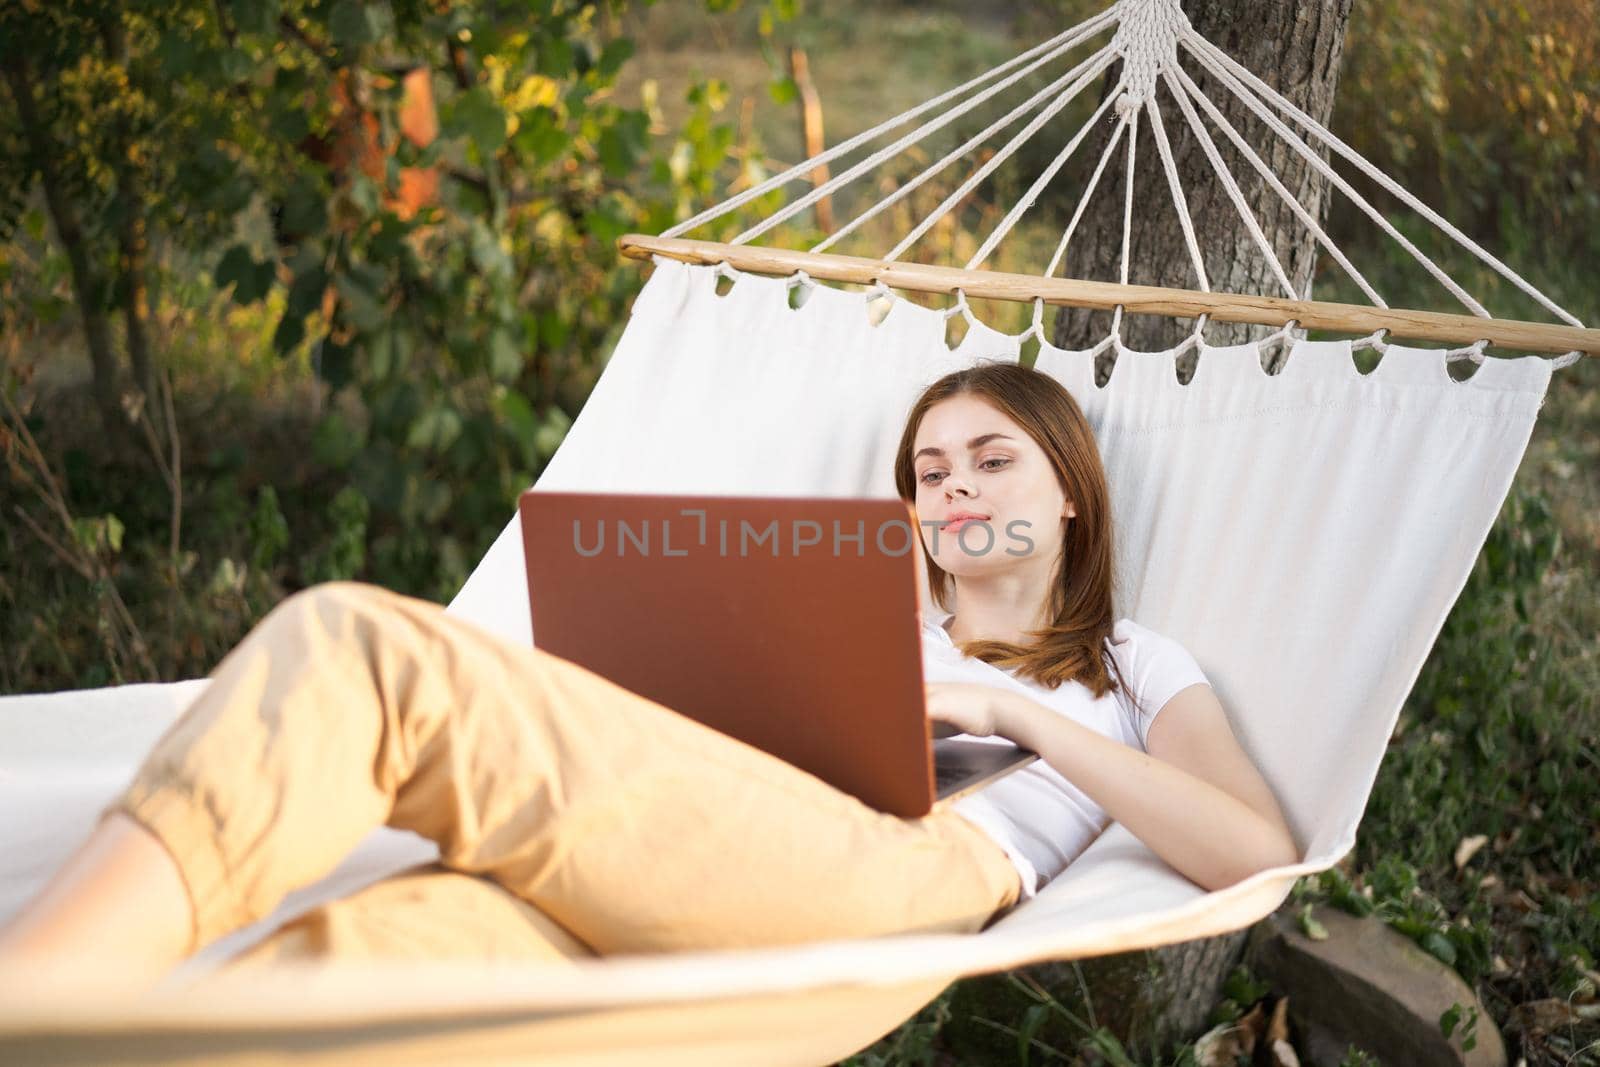 woman outdoors with laptop lies in hammock leisure technology. High quality photo